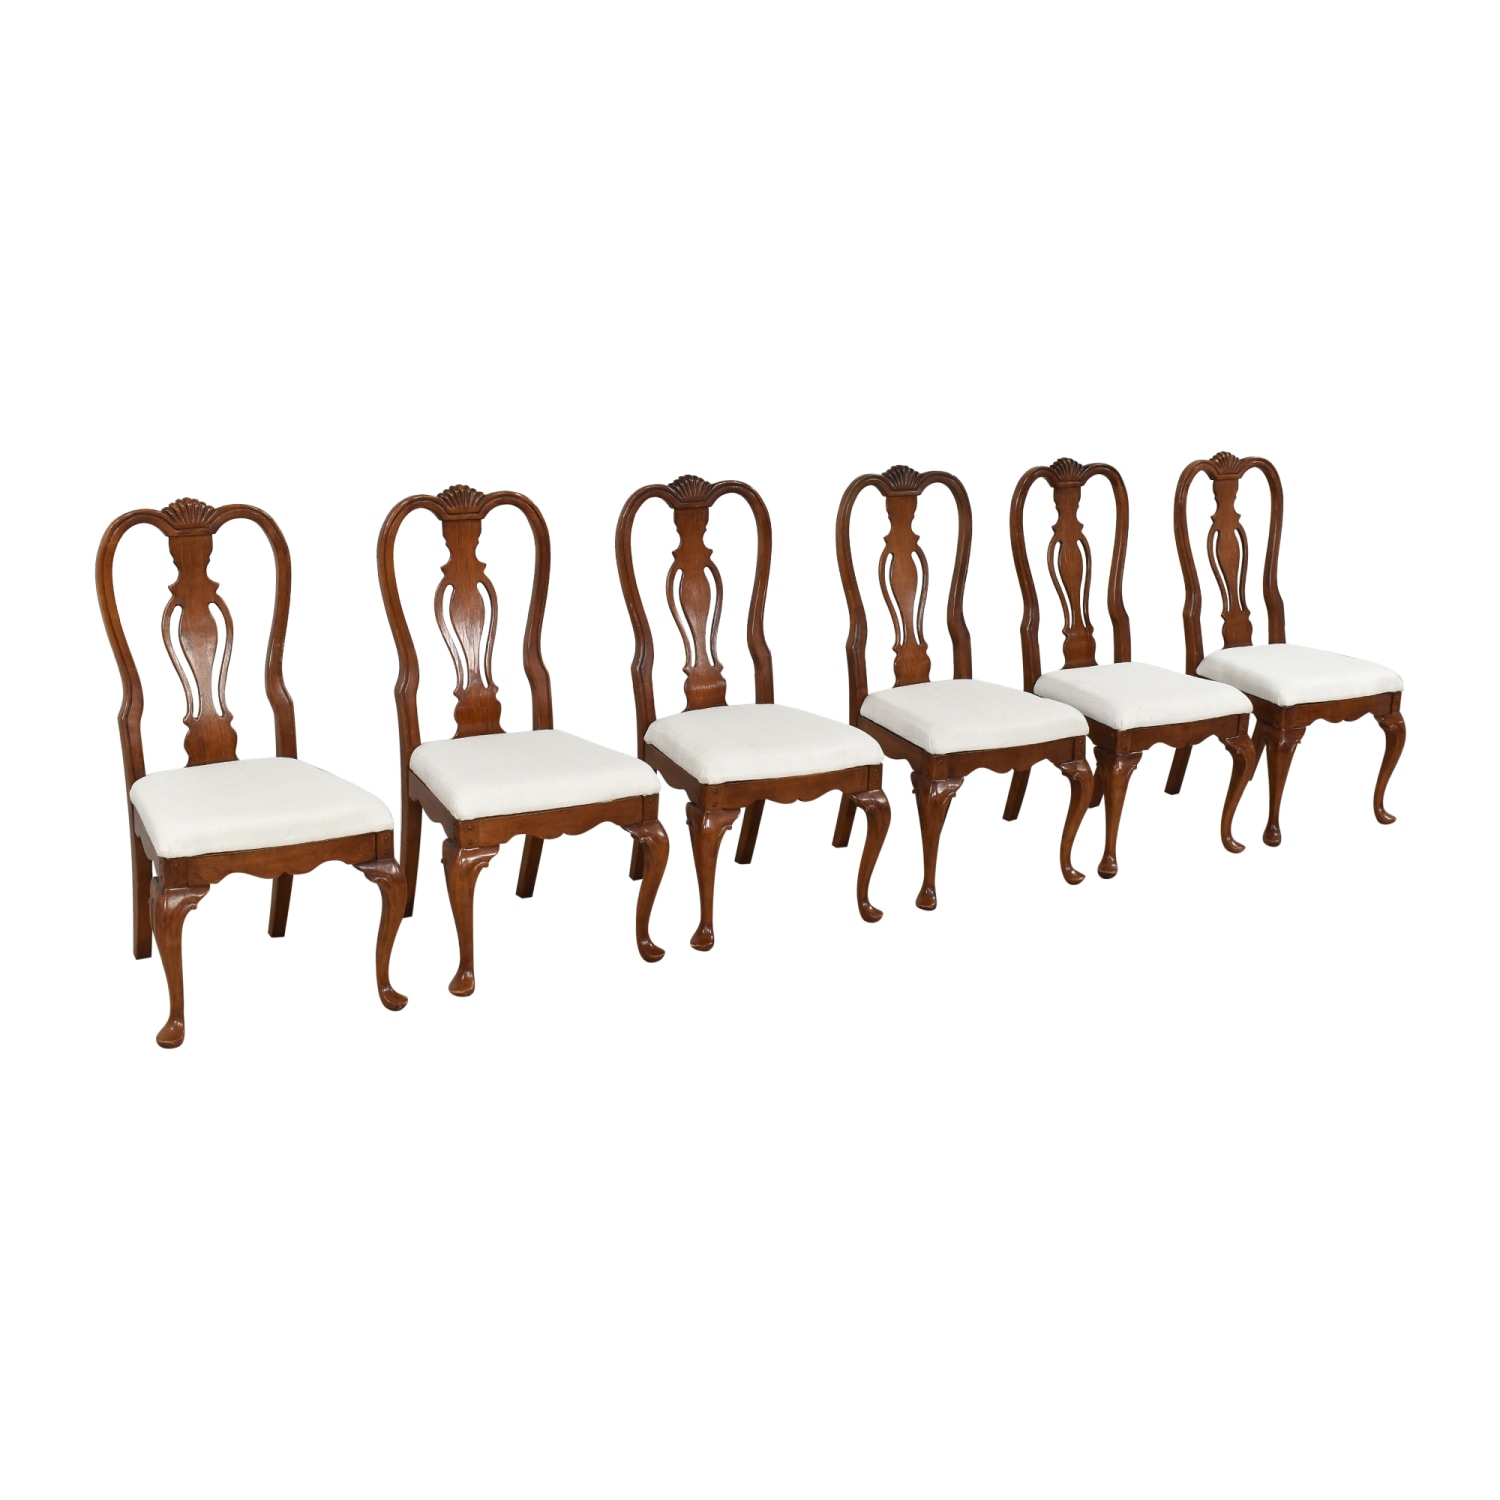 Ethan Allen Ethan Allen Country French Dining Chairs price